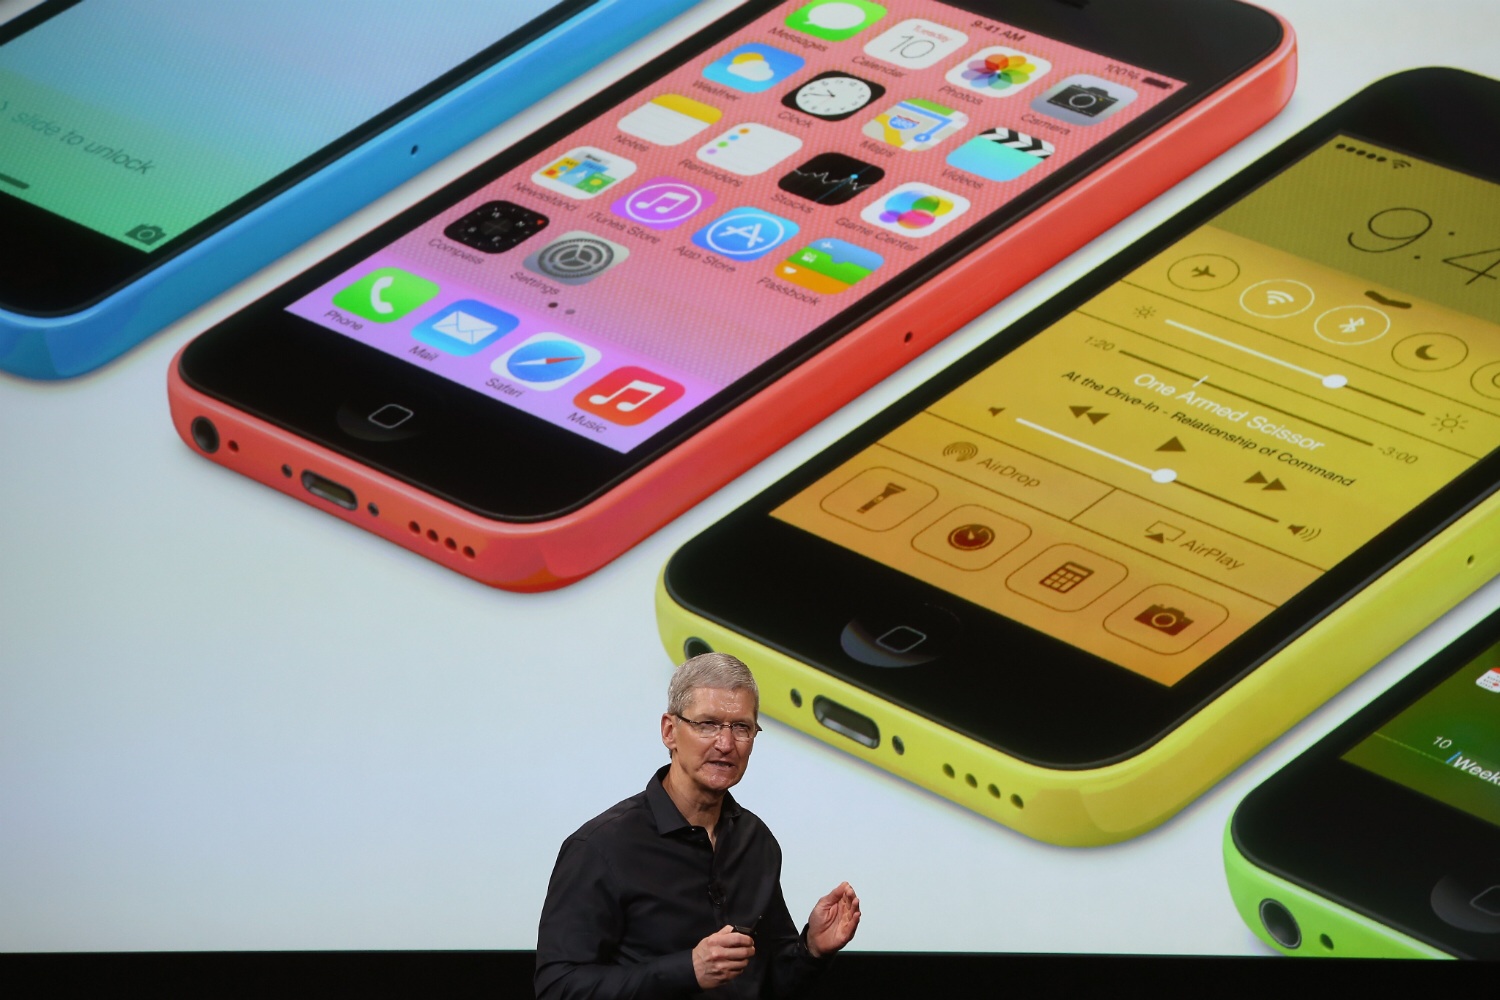 Apple CEO Tim Cook, stubbornly refusing to announce a large-screen iPhone at Apple's press event in San Francisco on September 10, 2013 (Justin Sullivan / Getty Images)